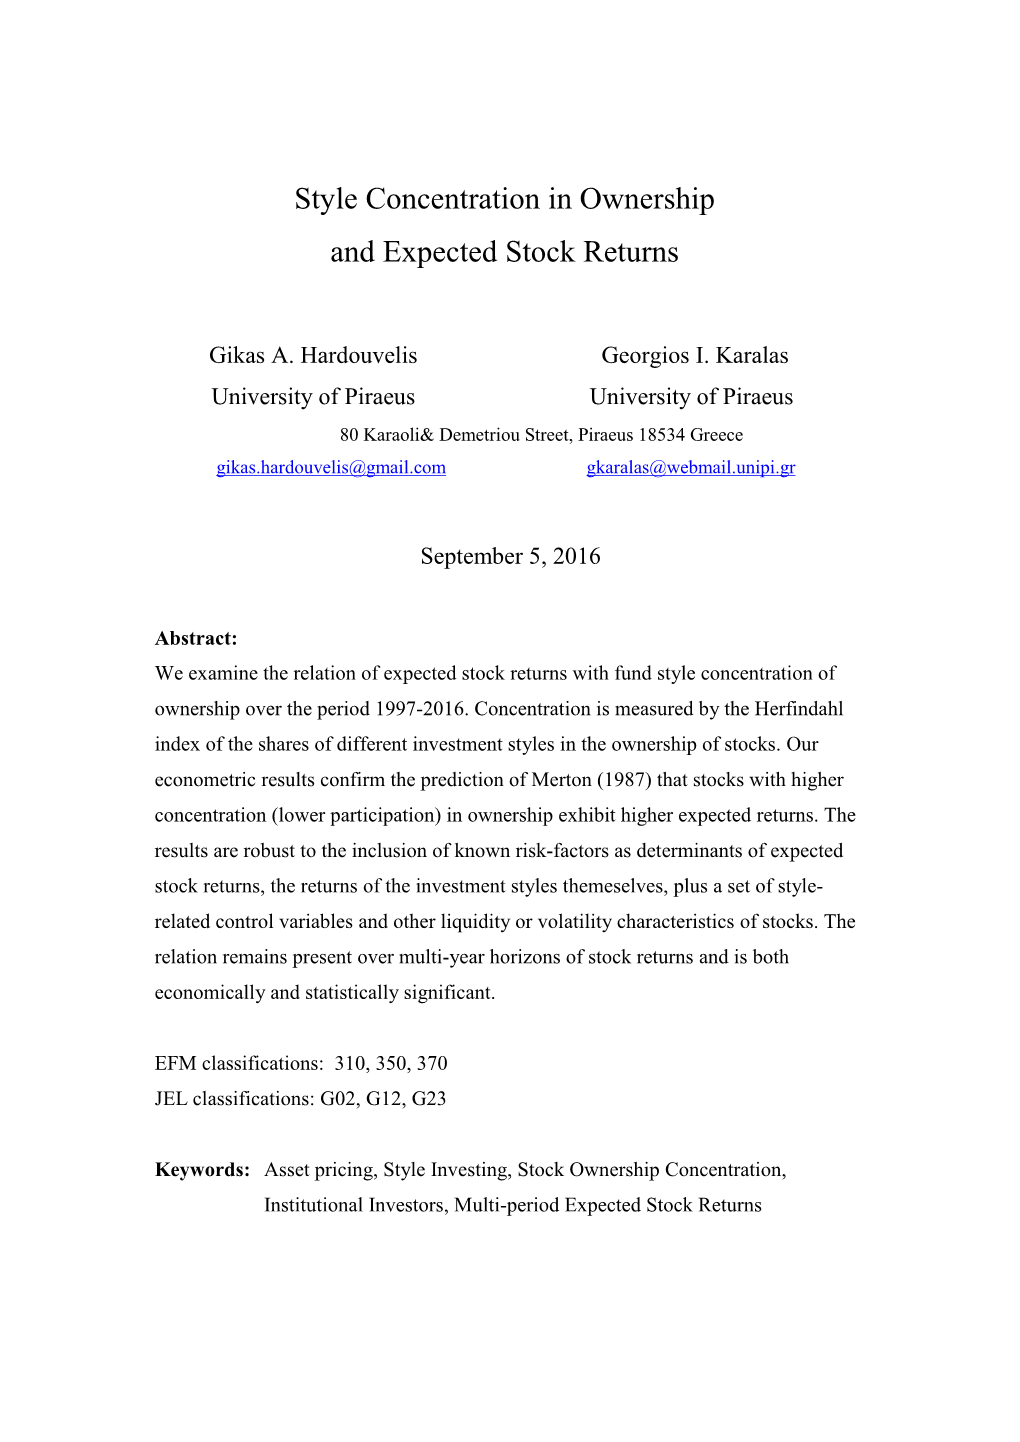 Style Concentration in Ownership and Expected Stock Returns